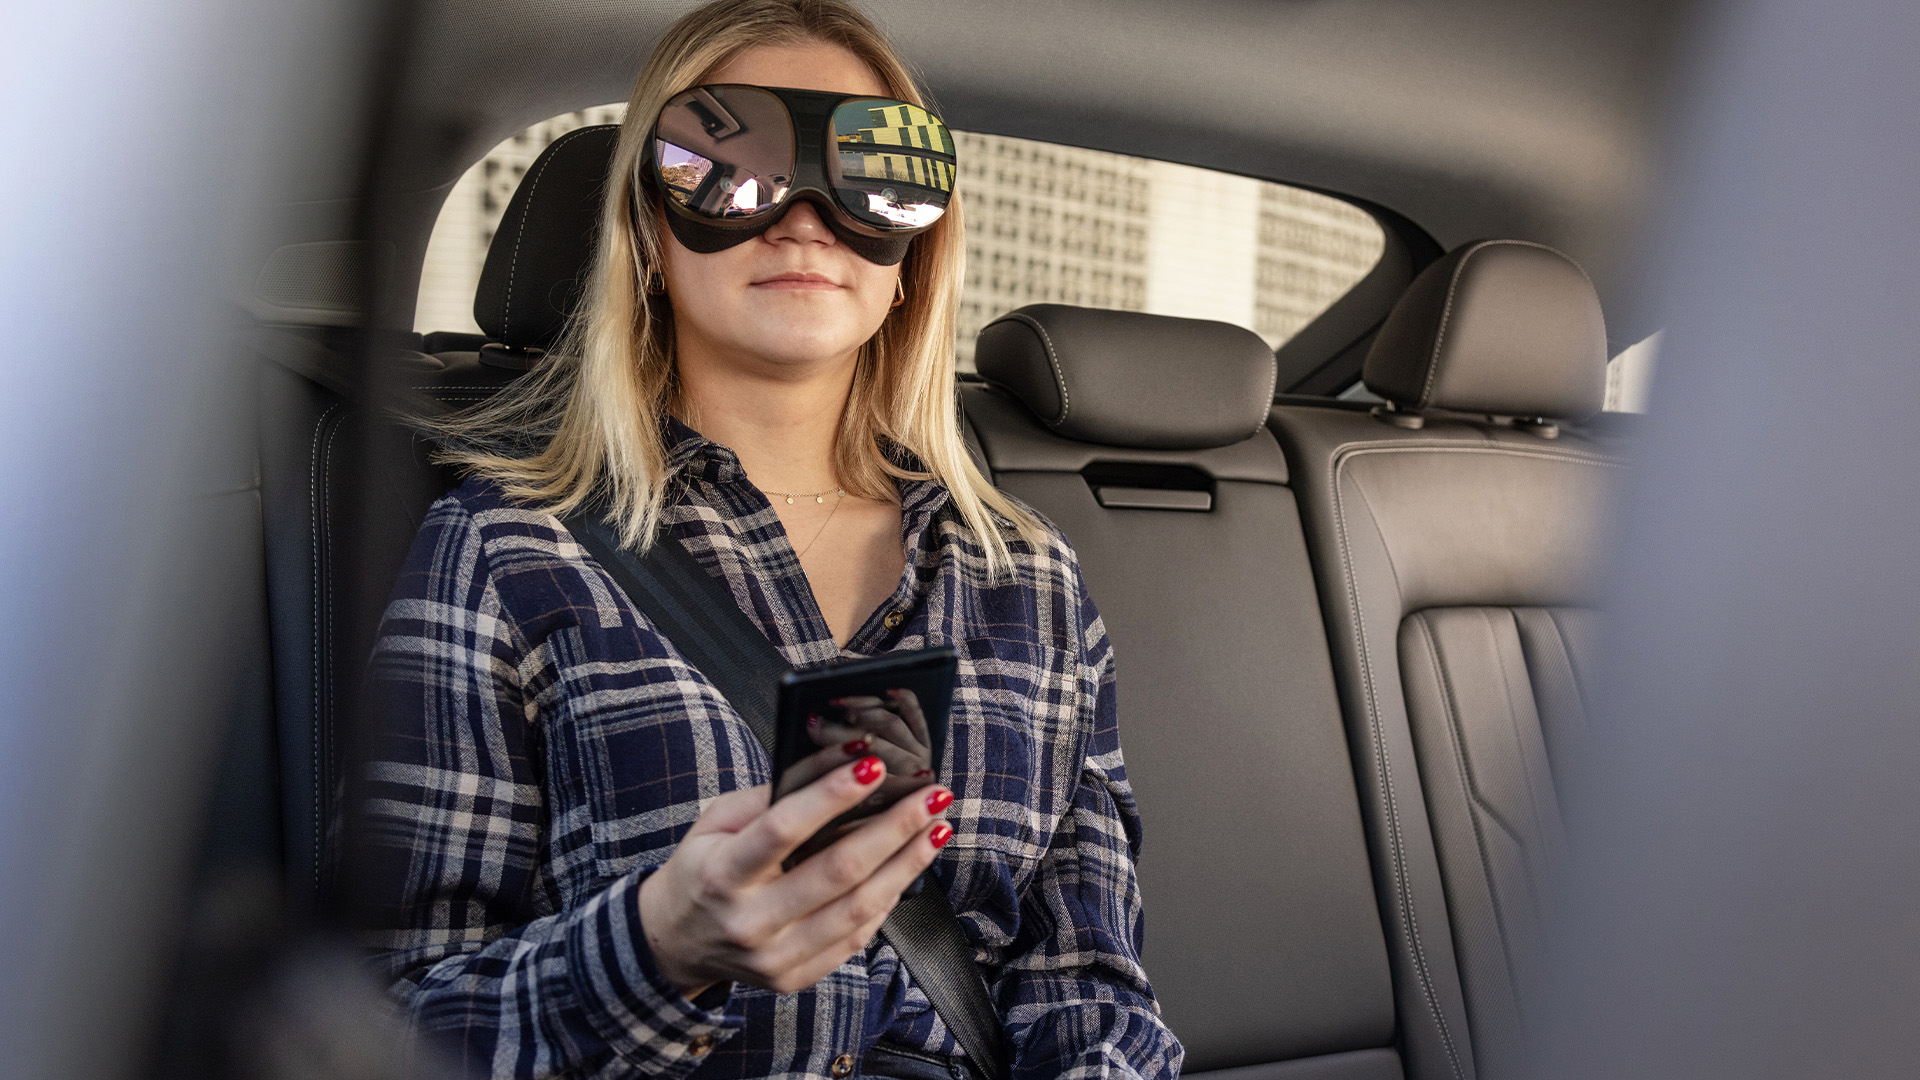 A woman sitting on the back seat of a vehicle using holoride technology via a VR headset.